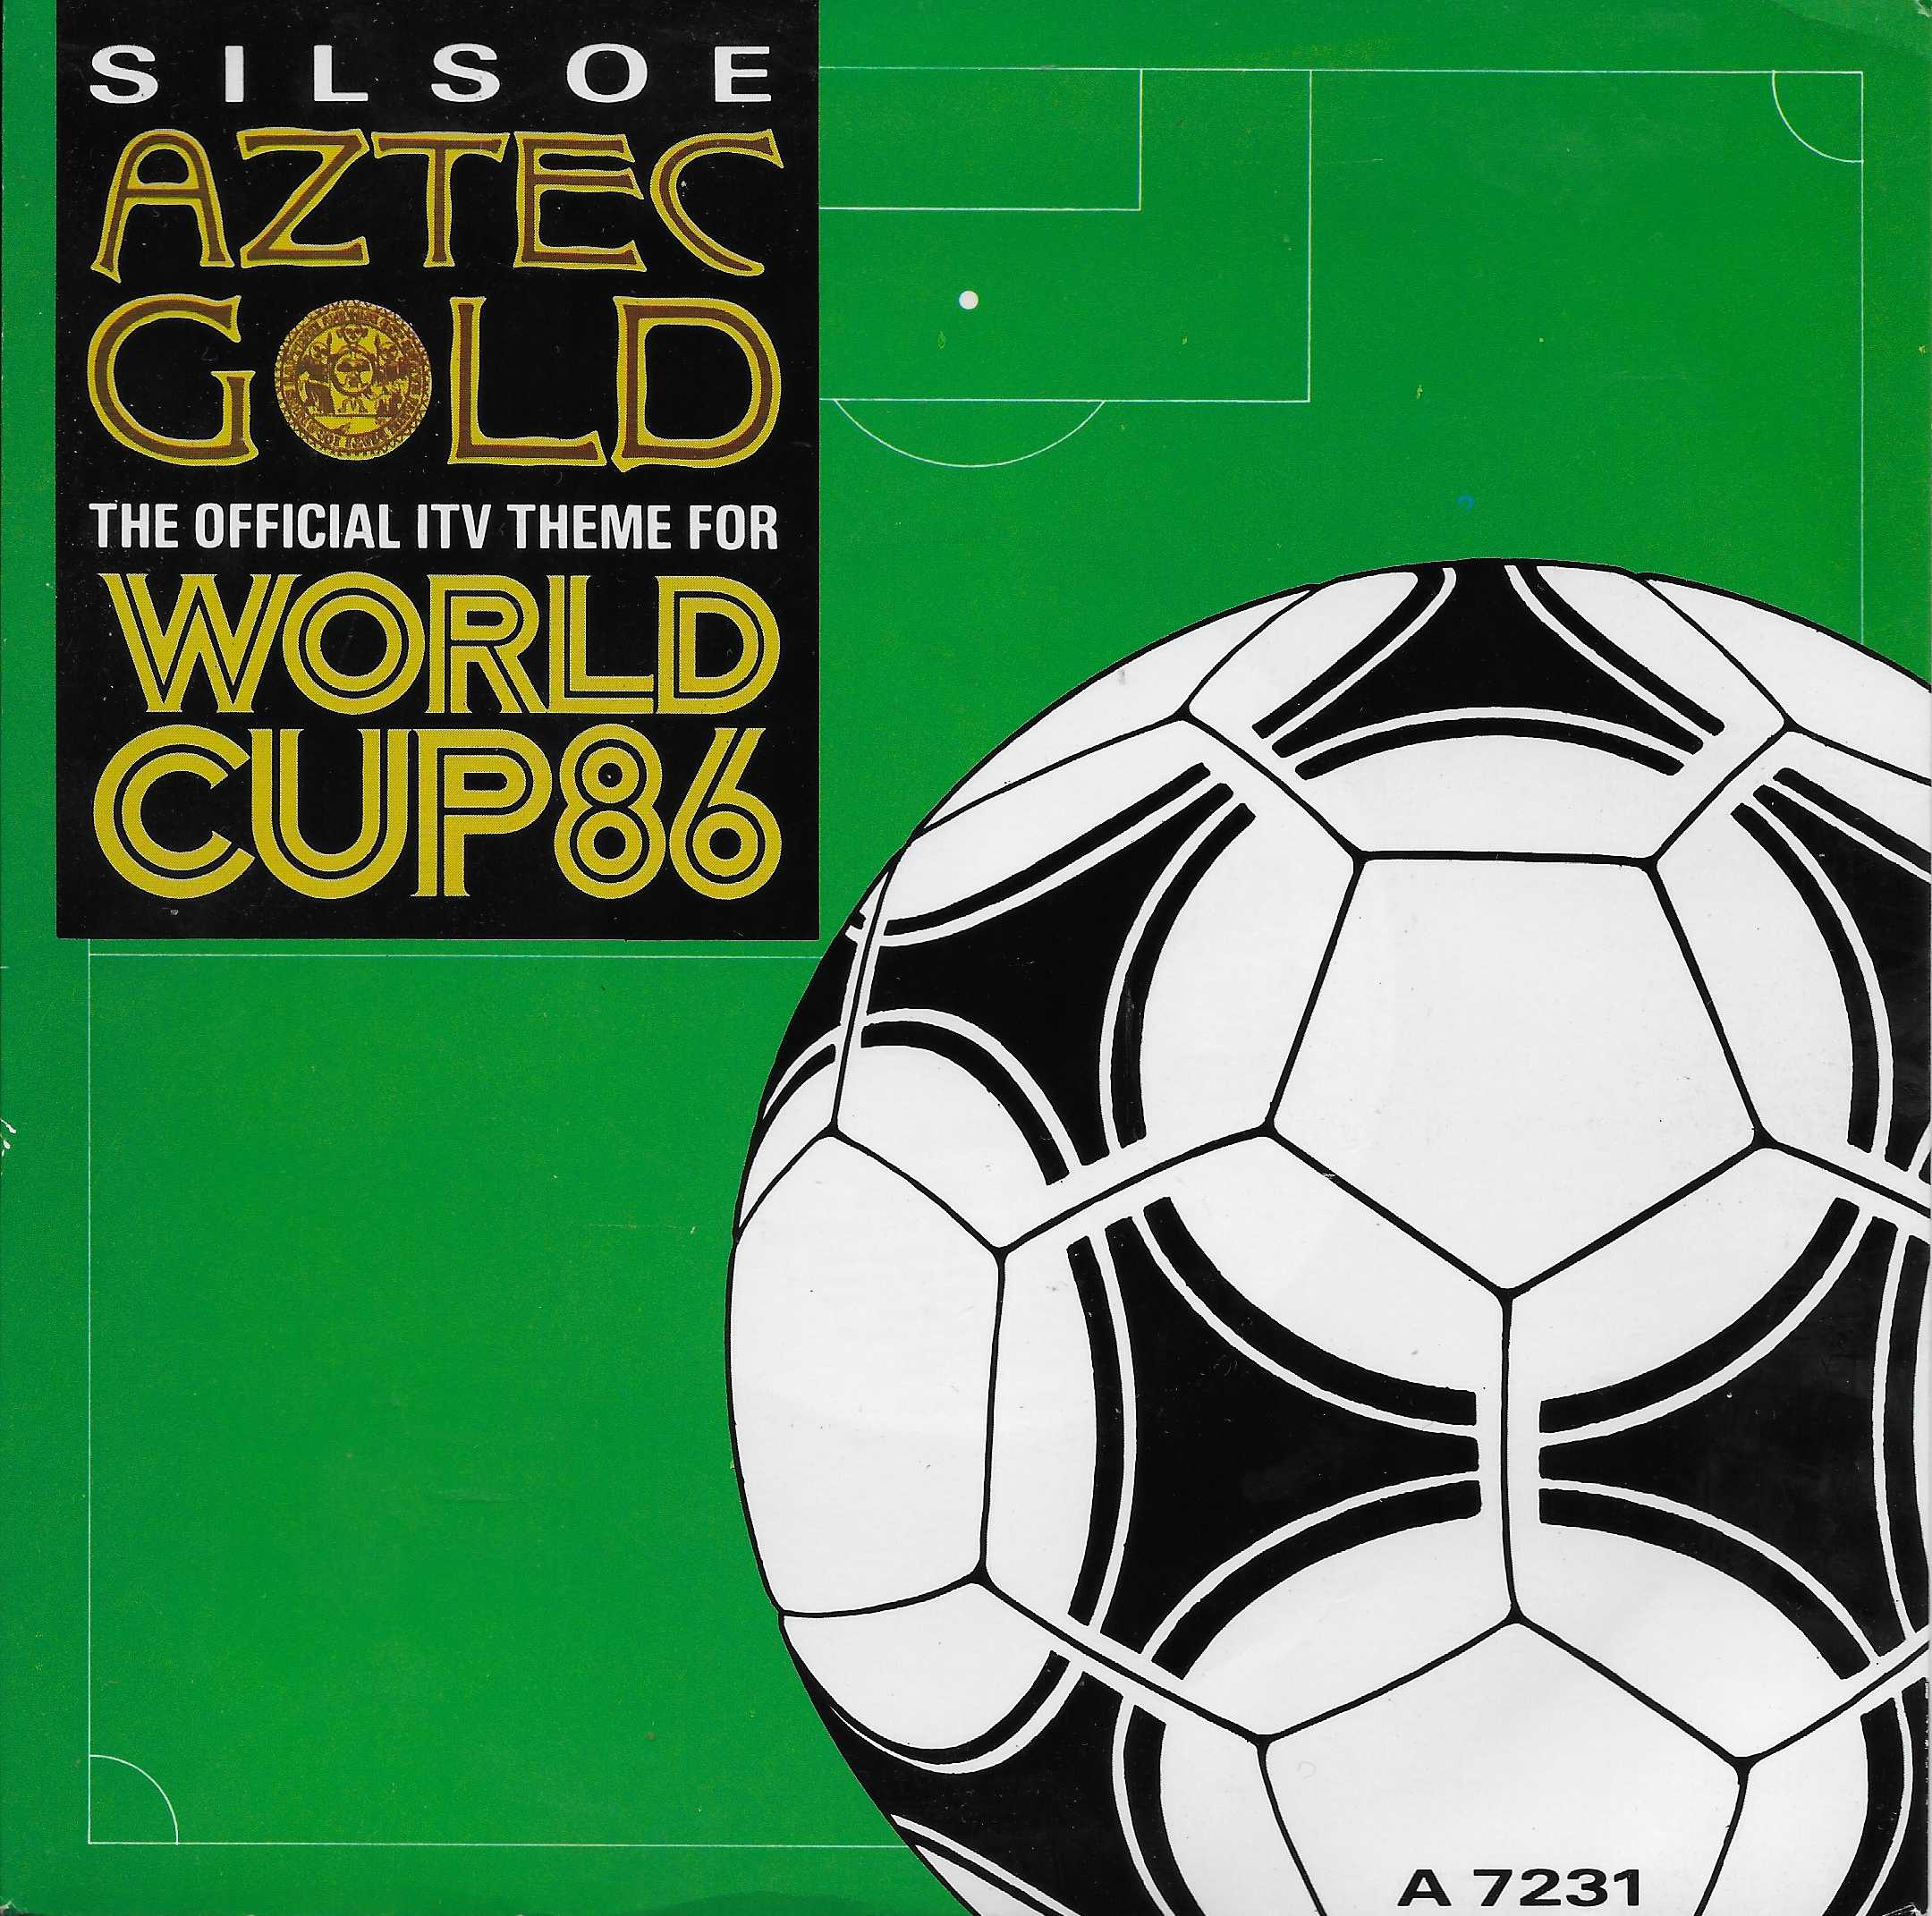 Picture of A 7231 Aztec gold (ITV World Cup theme (1986)) by artist R. Argent / P. Van Hooke from ITV, Channel 4 and Channel 5 singles library